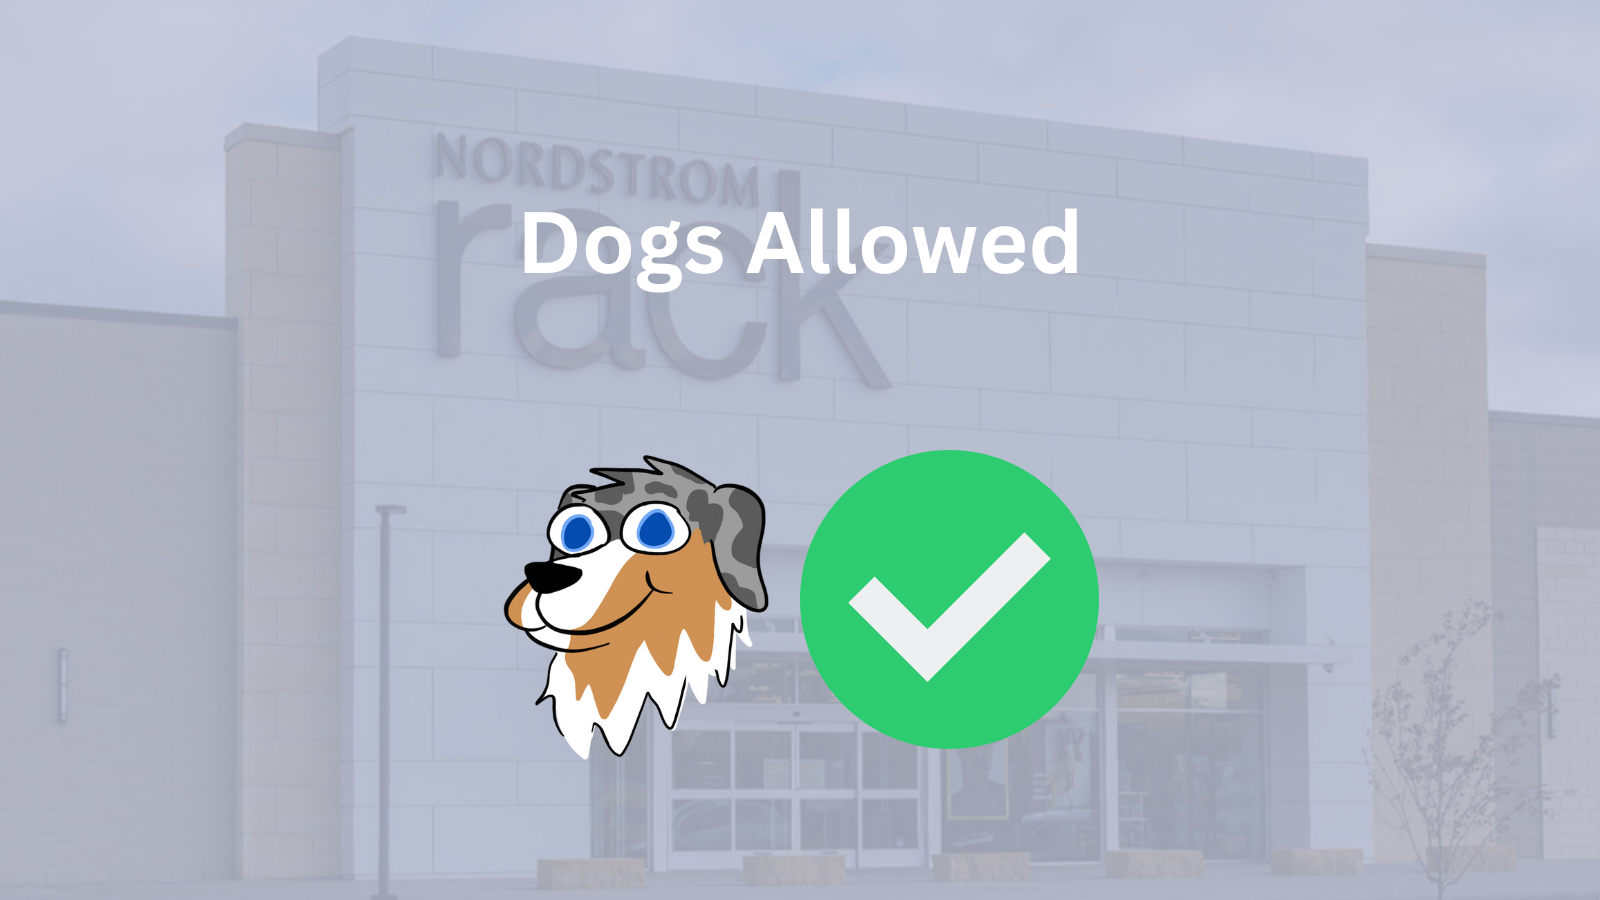 Image Text: "Dogs Allowed"